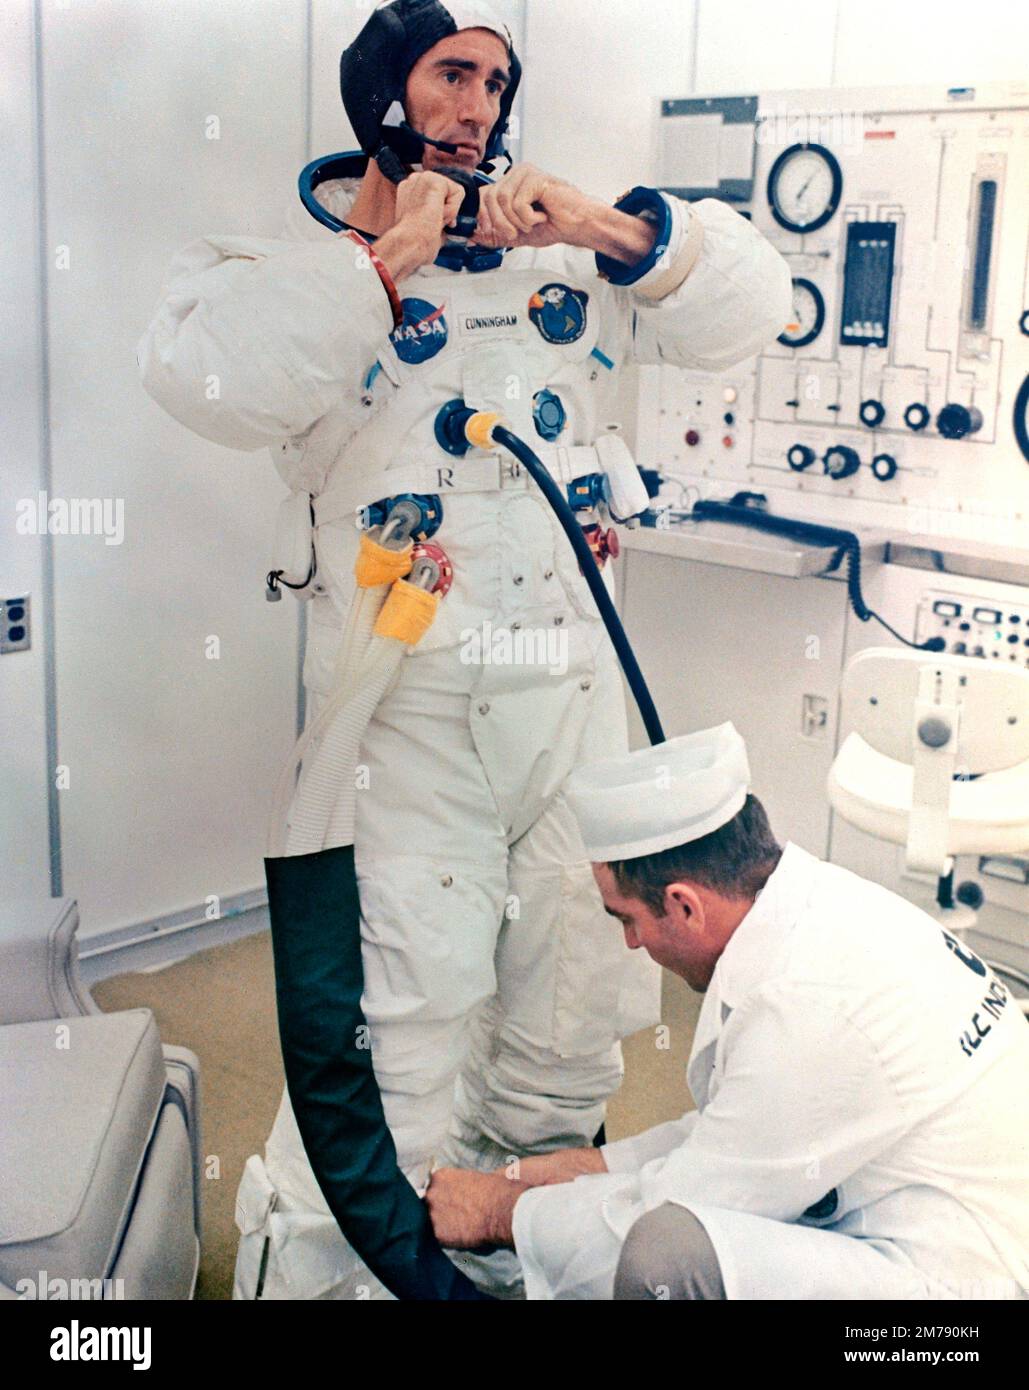 Cape Canaveral, United States. 11 October, 1968. NASA Apollo VII prime crew astronaut Walter Cunningham, suits up as he prepares for launch day at the Kennedy Space Center, October 11, 1968 in Cape Canaveral, Florida. Cunningham died January 4, 2023 at 90-years-old, the last surviving member of the NASA Apollo 7 mission. Stock Photo